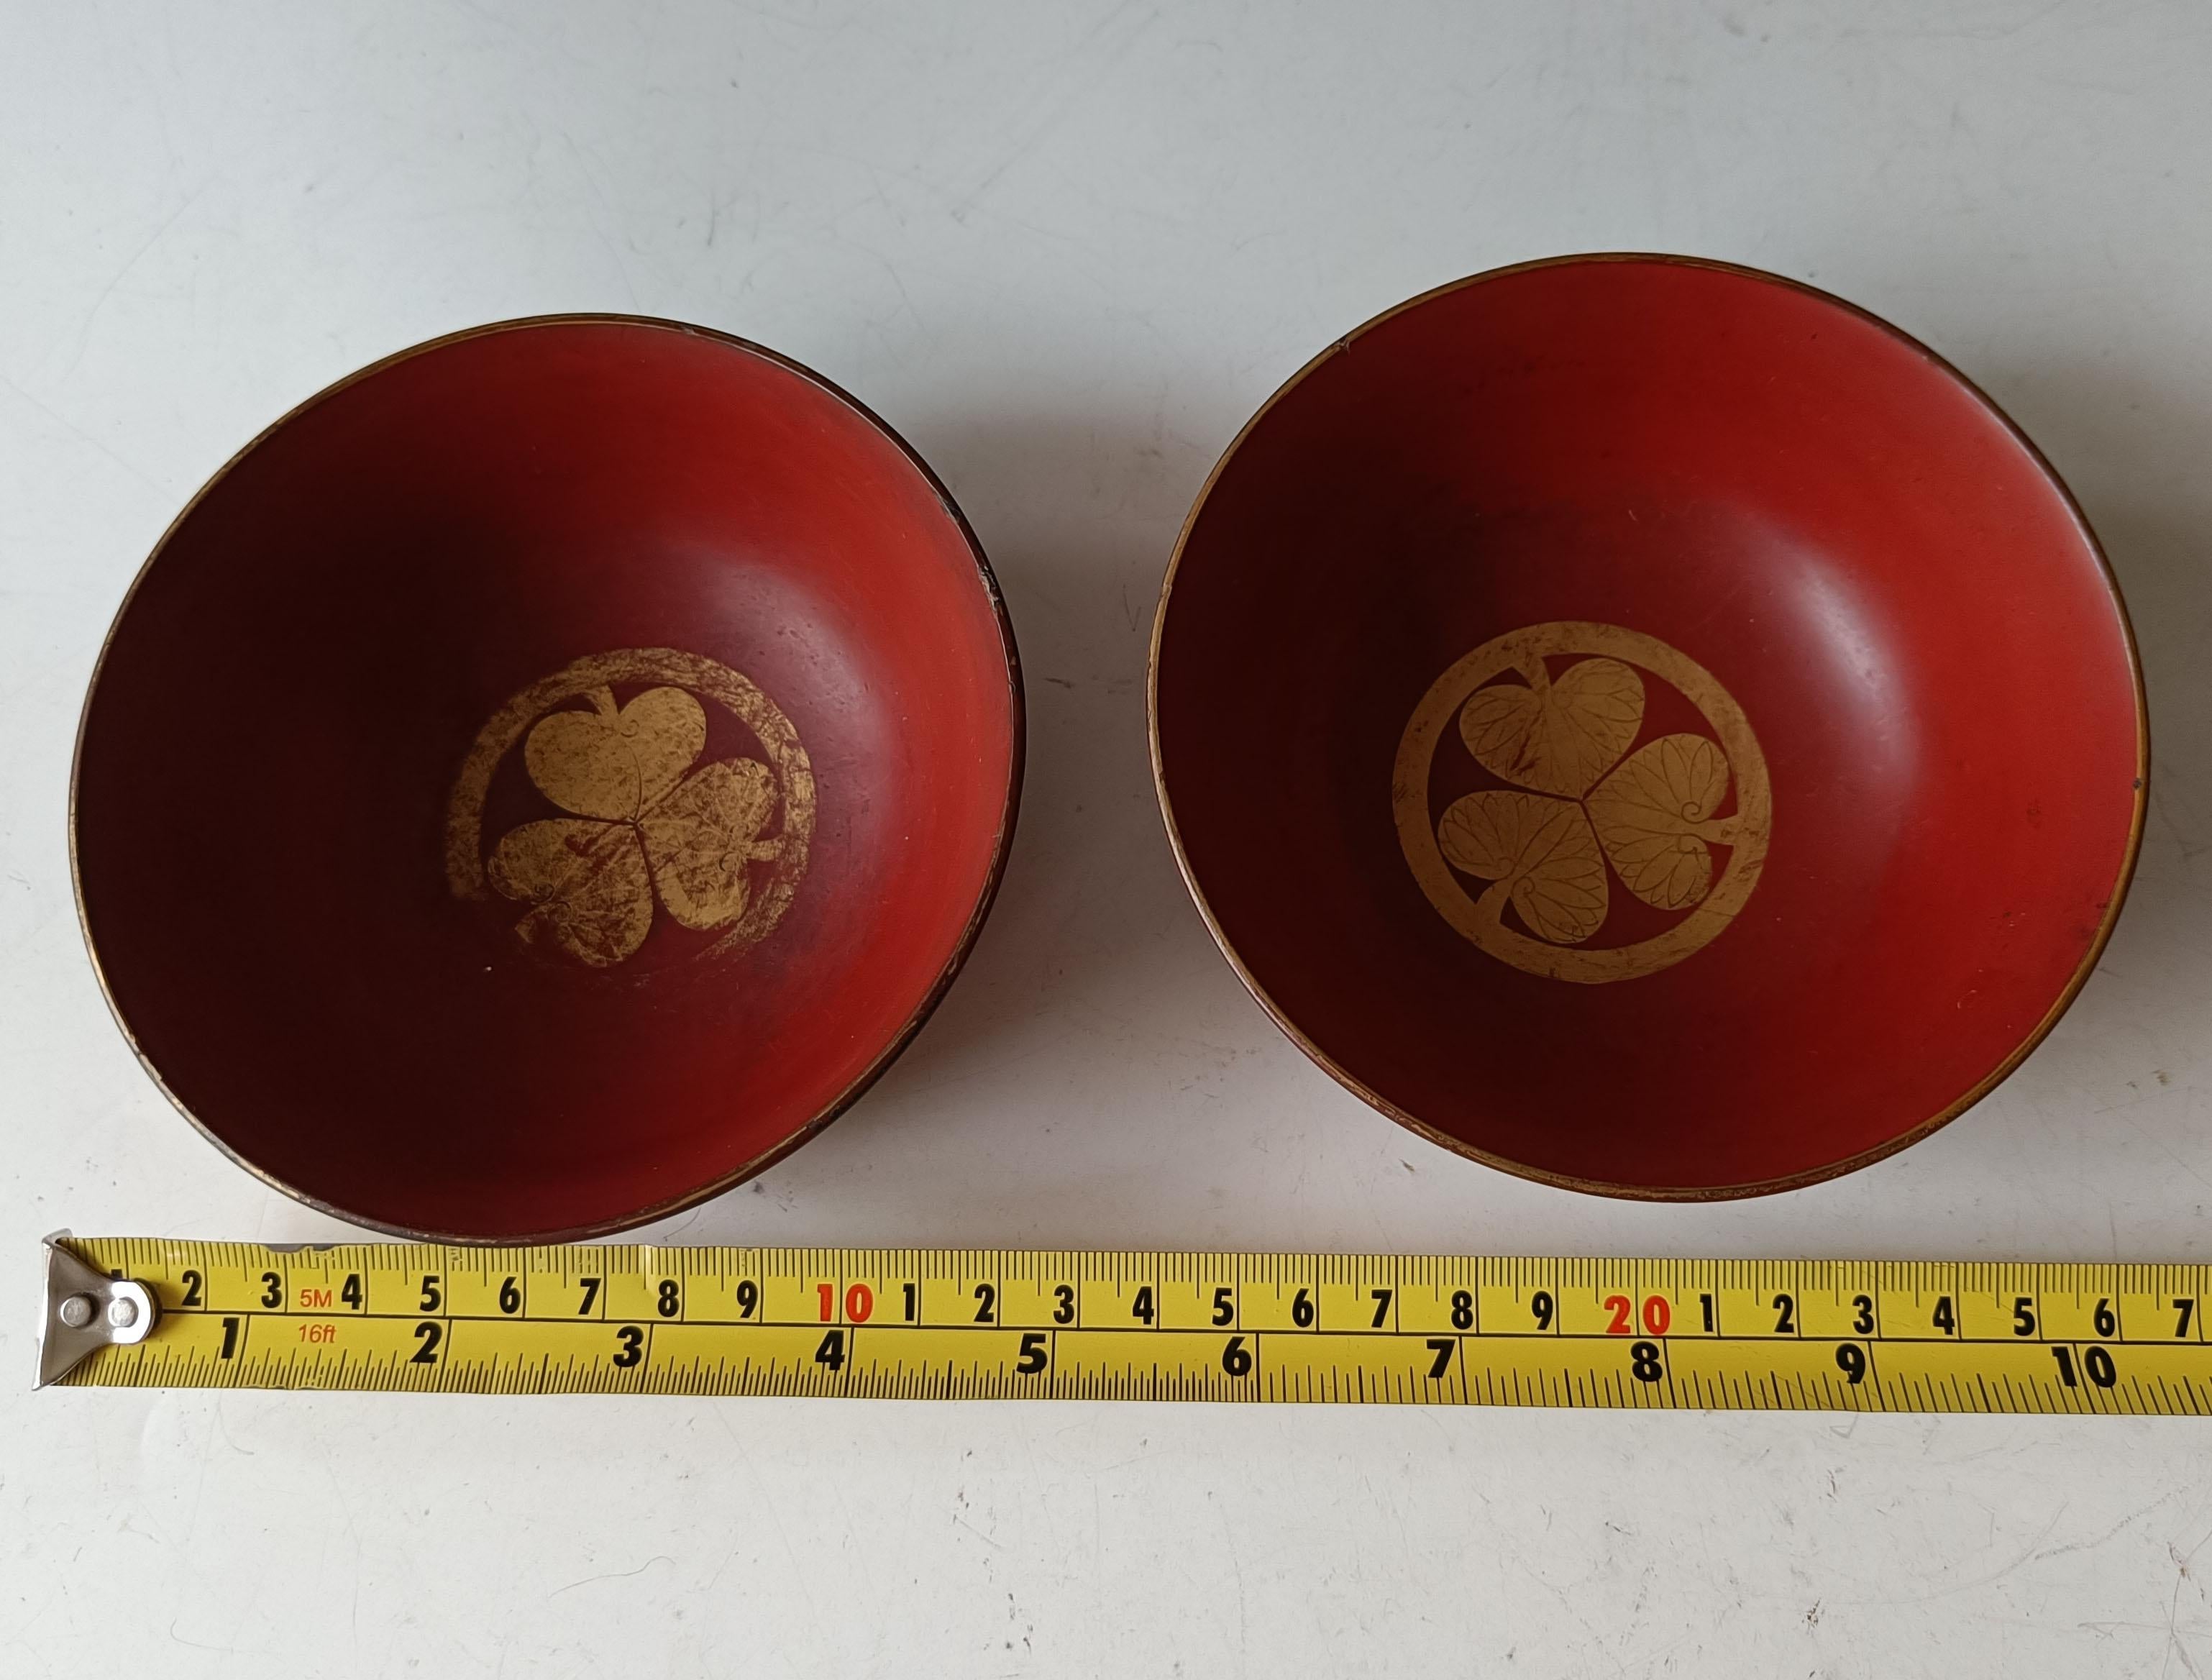 Japanese Lacquered Wood Bowls 19th Century Asian Antiques 中国古董 For Sale 1